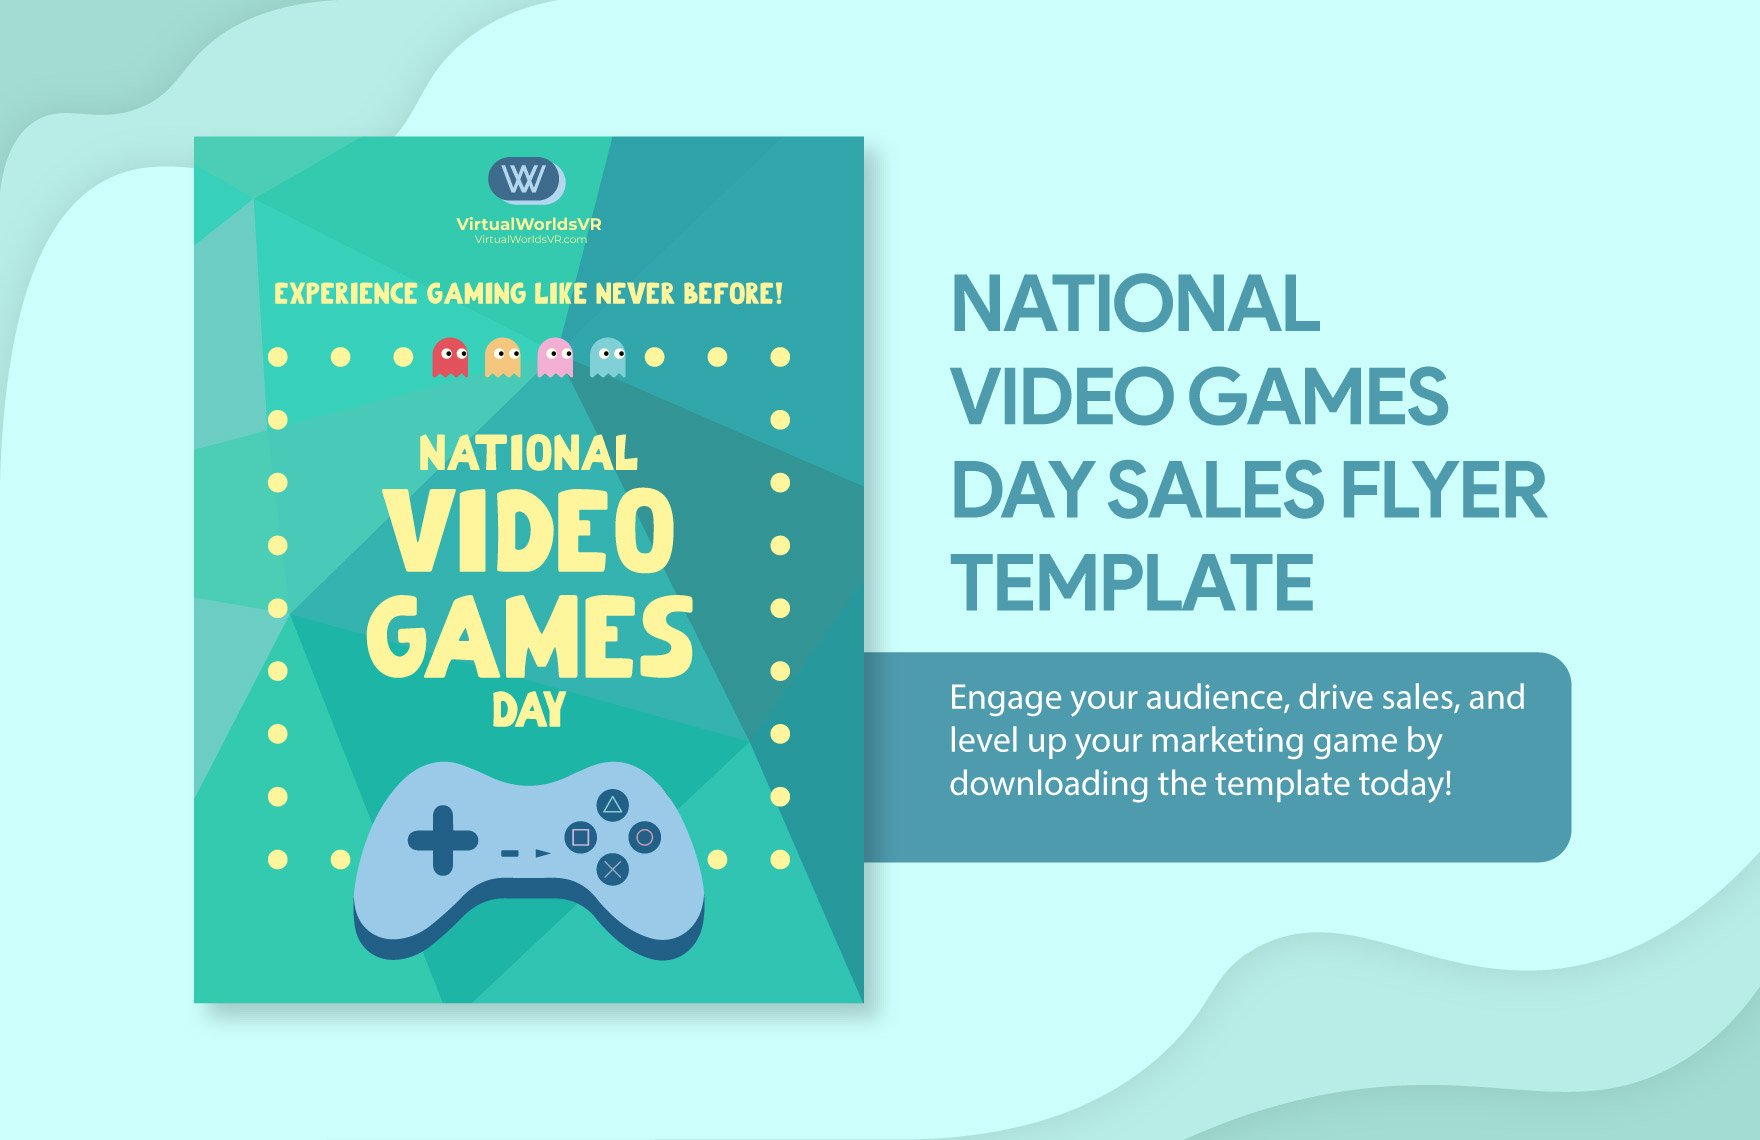 National Video Games Day Sales Flyer Template